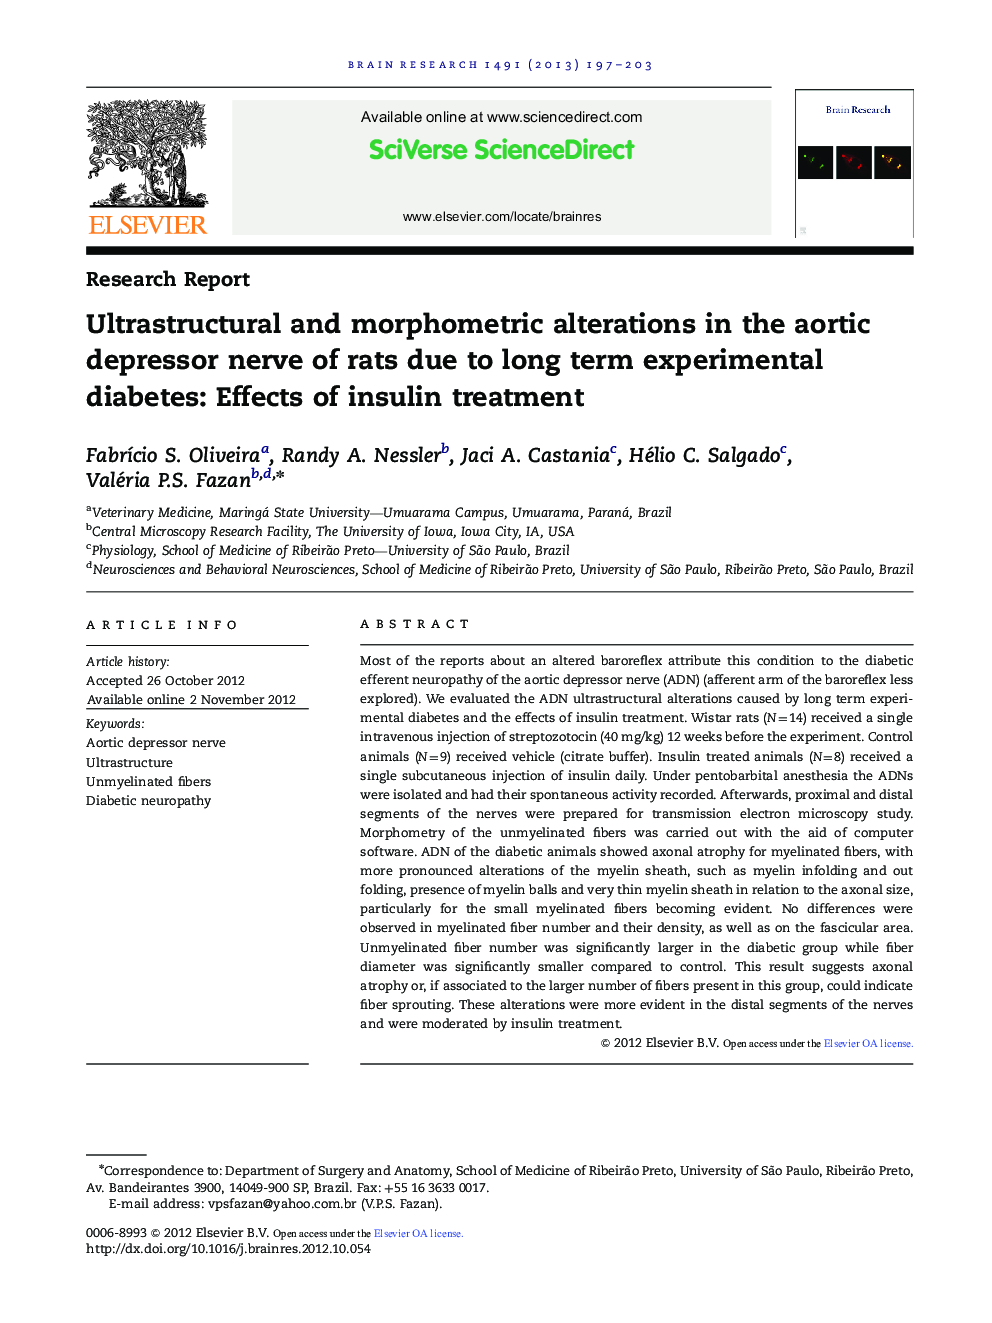 Research ReportUltrastructural and morphometric alterations in the aortic depressor nerve of rats due to long term experimental diabetes: Effects of insulin treatment